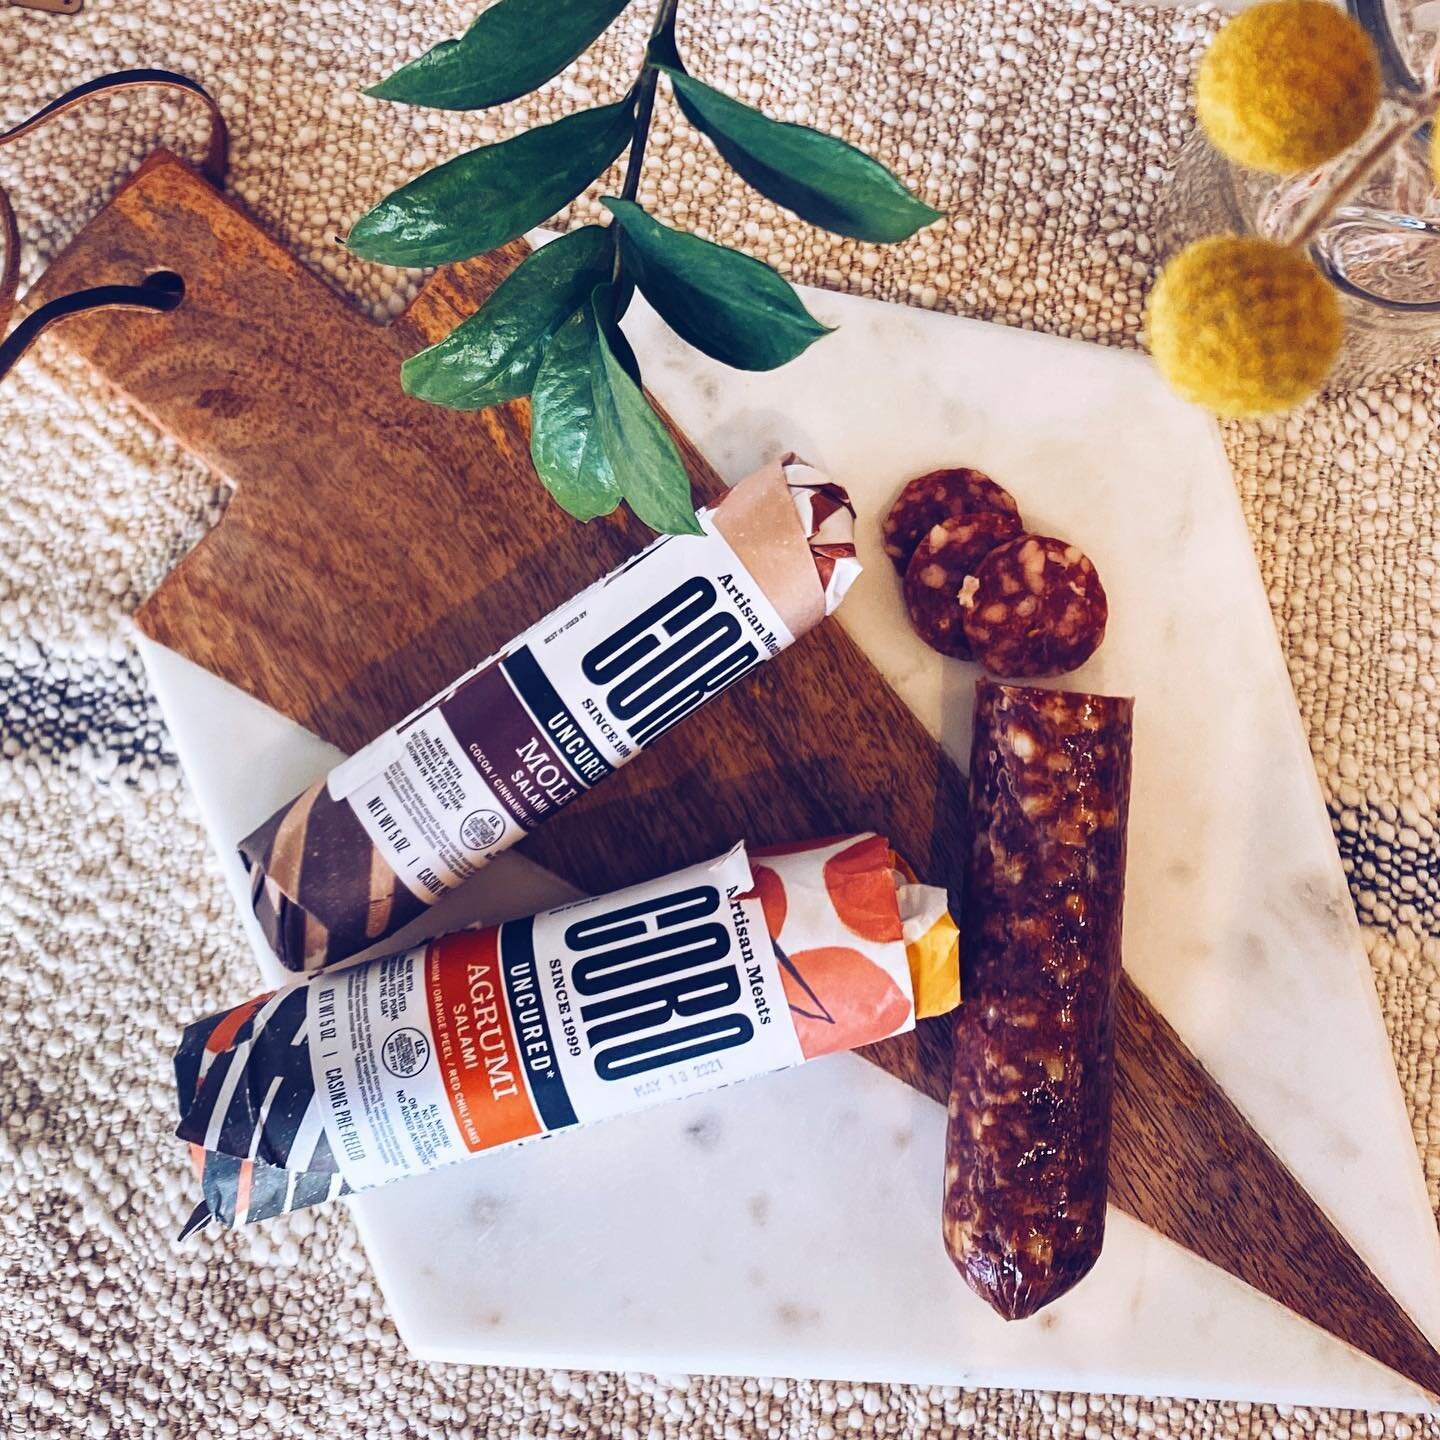 No joke guys, these are sure to jump-start a serious flavor crave! If you&rsquo;ve got a lover of uncured meats on your 🎁 list, or you yourself are just plain into people throwing passion into culinary creations - we promise these deliver ALL THE JO